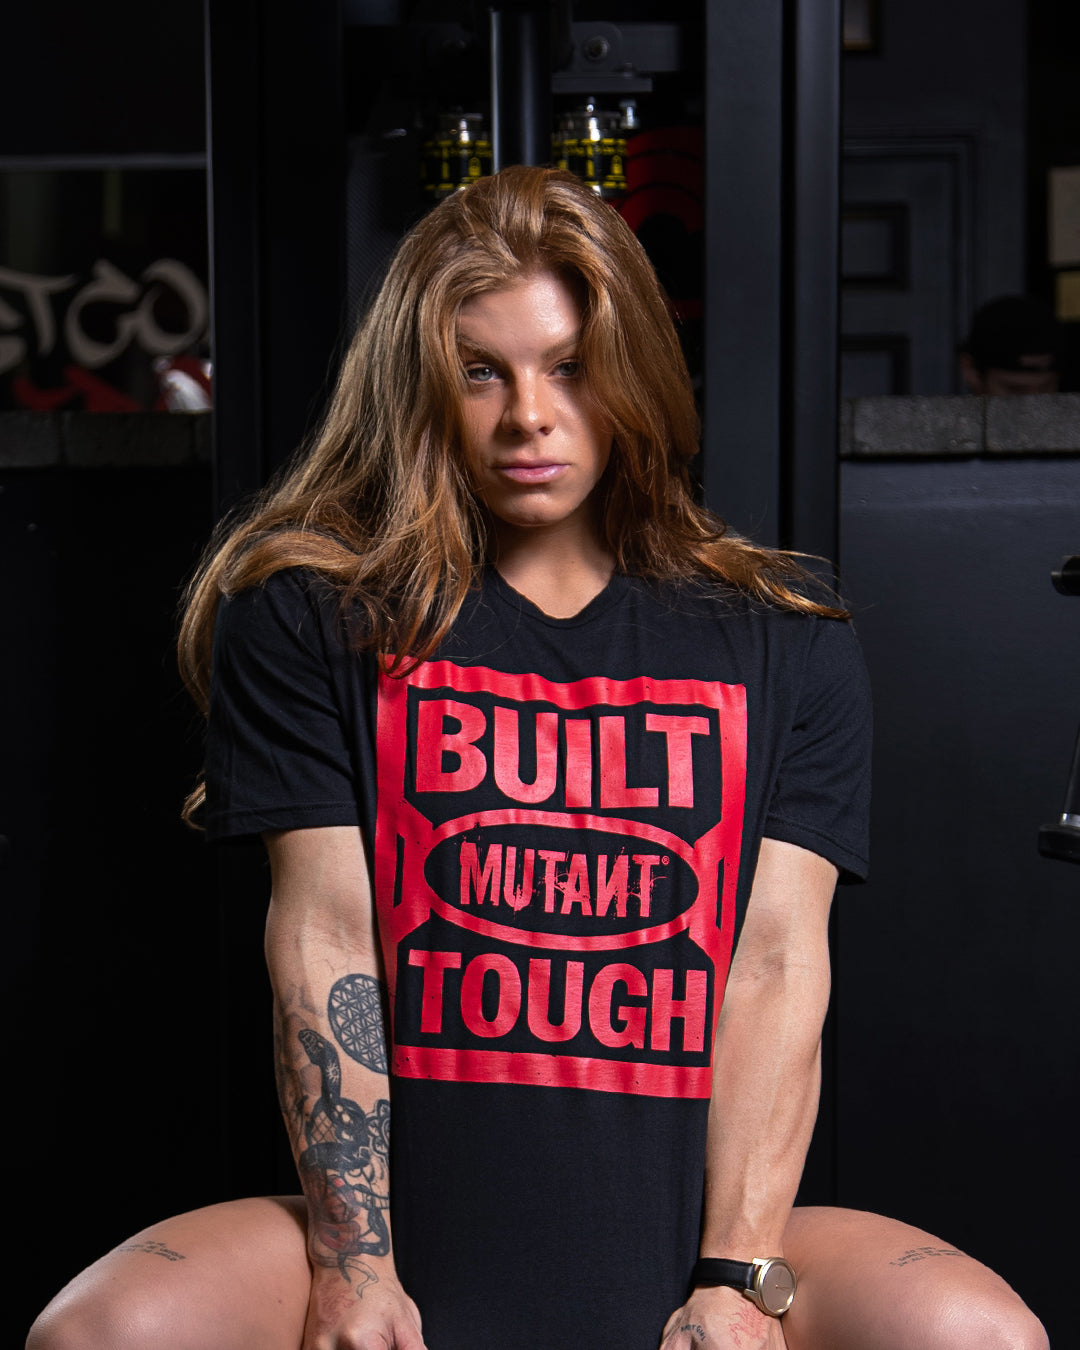 Shelby Guillaume posing at the gym while wearing the black 'MUTANT's Truck Month' t-shirt that features the phrase 'Built Mutant Tough' in red letters.